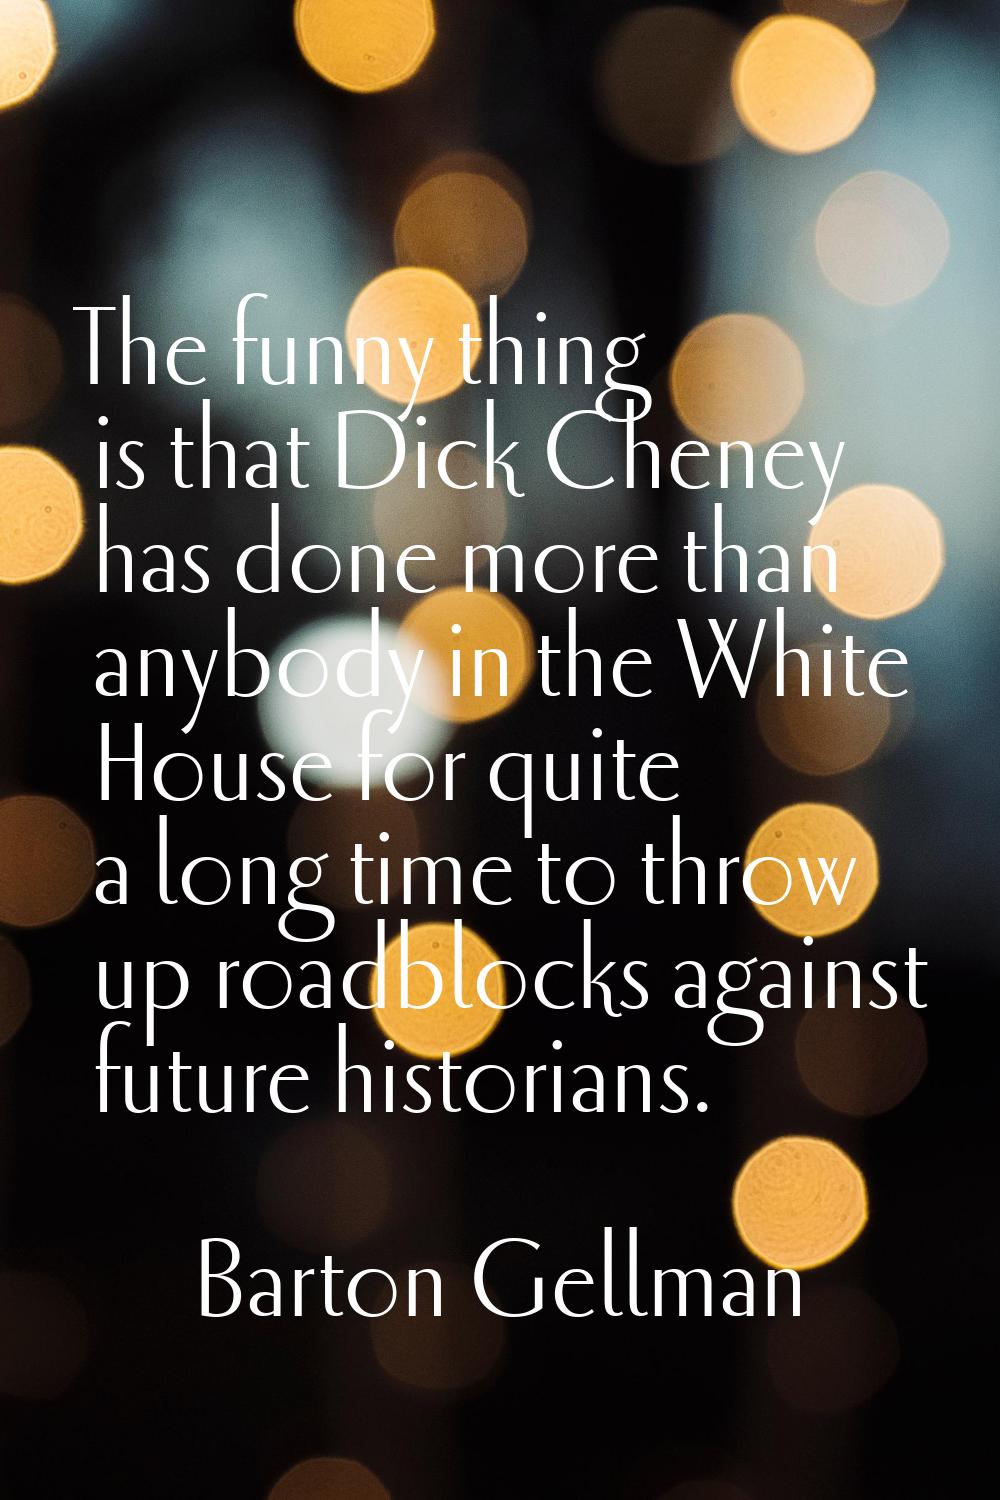 The funny thing is that Dick Cheney has done more than anybody in the White House for quite a long 